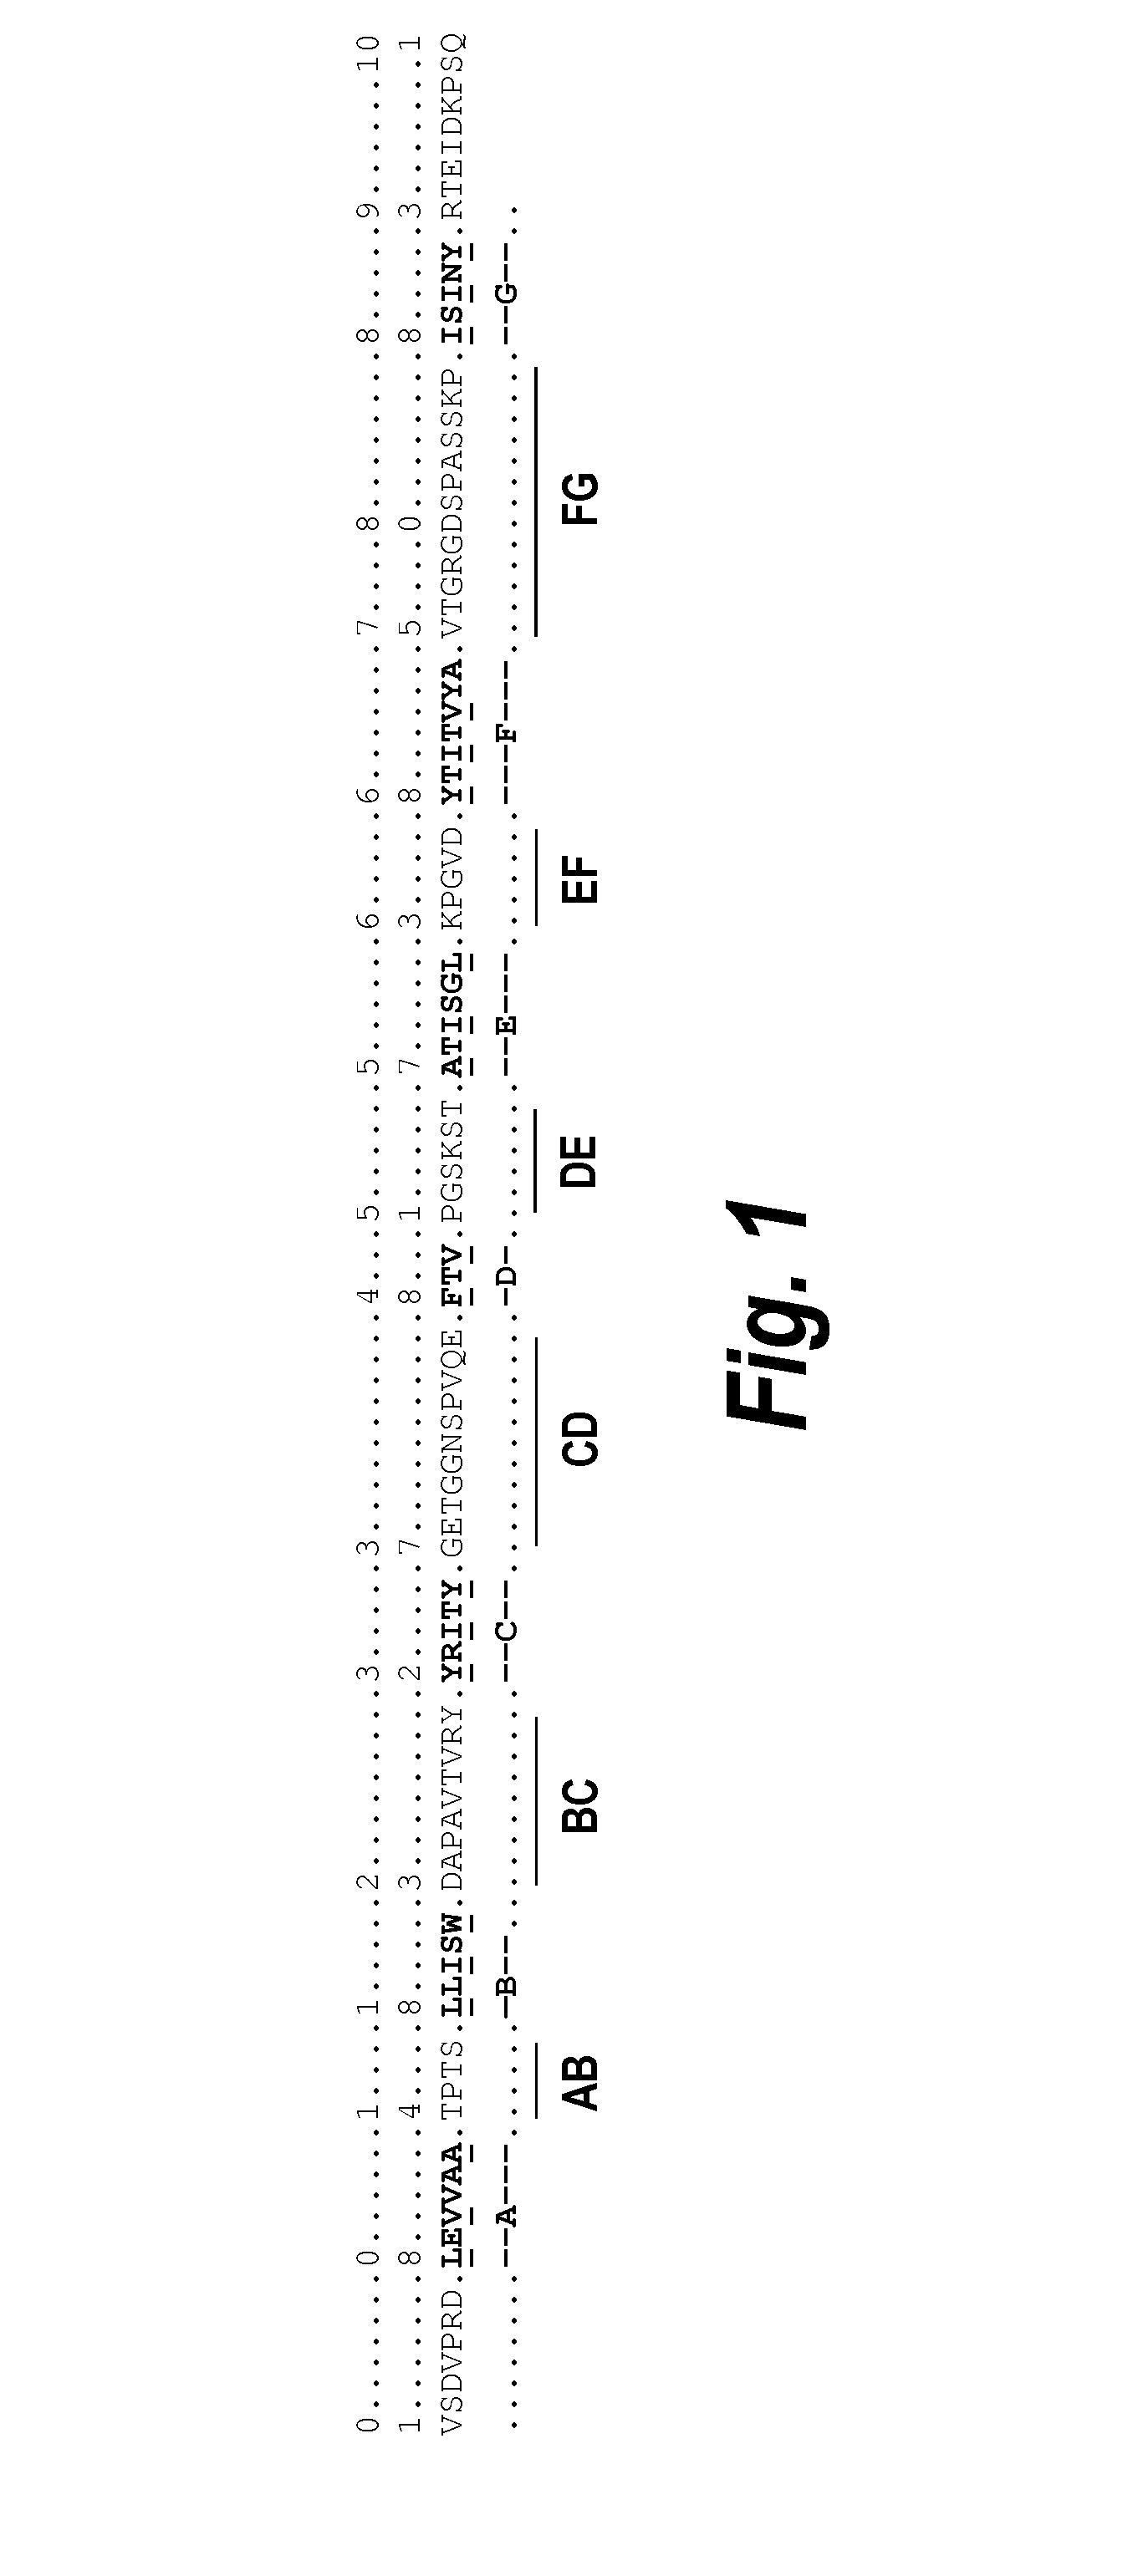 Fibronectin binding domains with reduced immunogenicity